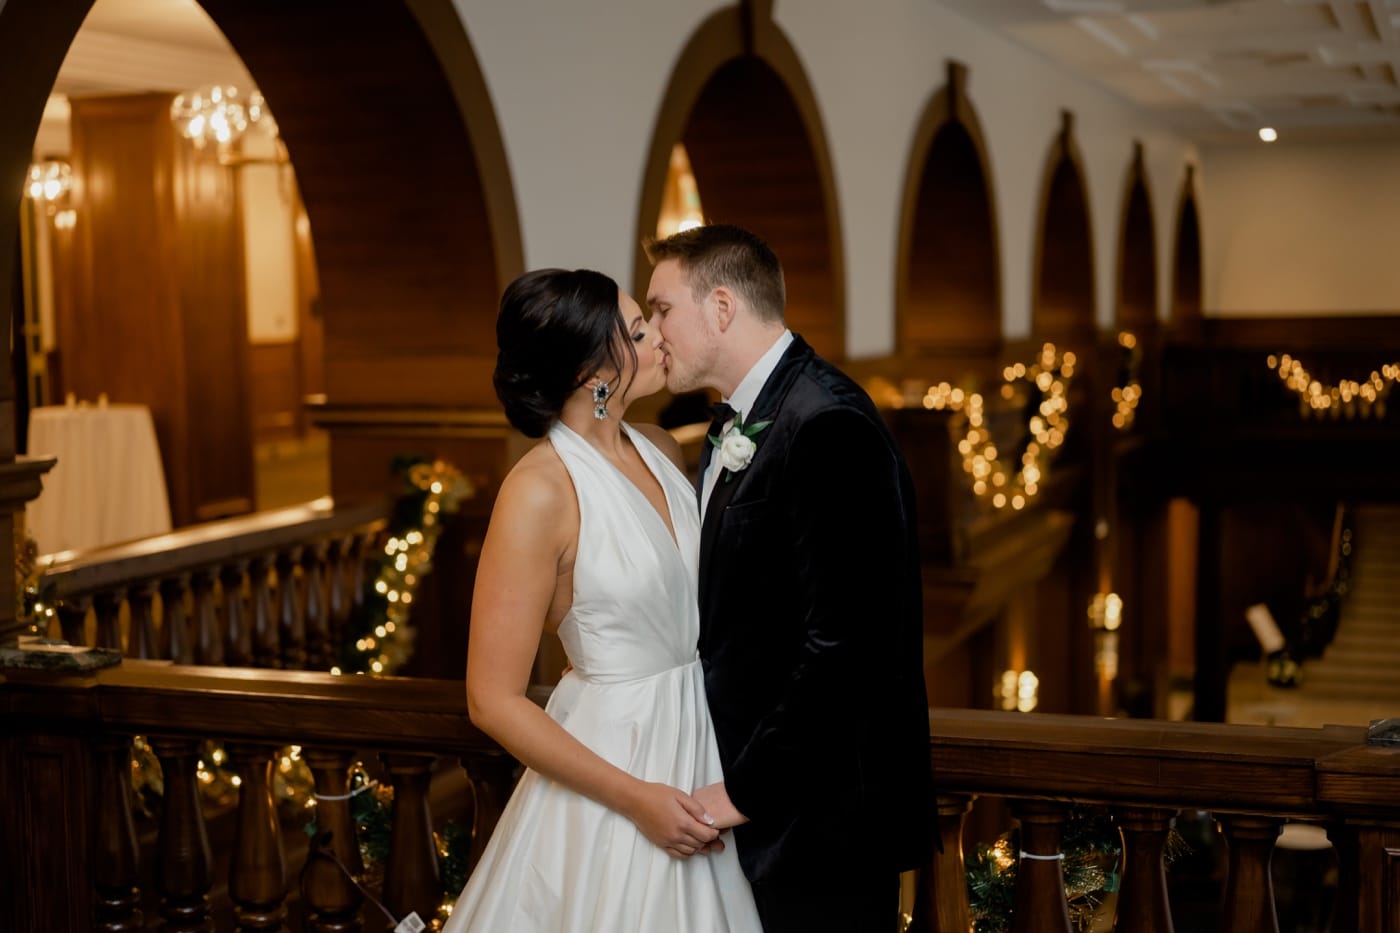 30 bride and groom portraits hotel fort des moines 2